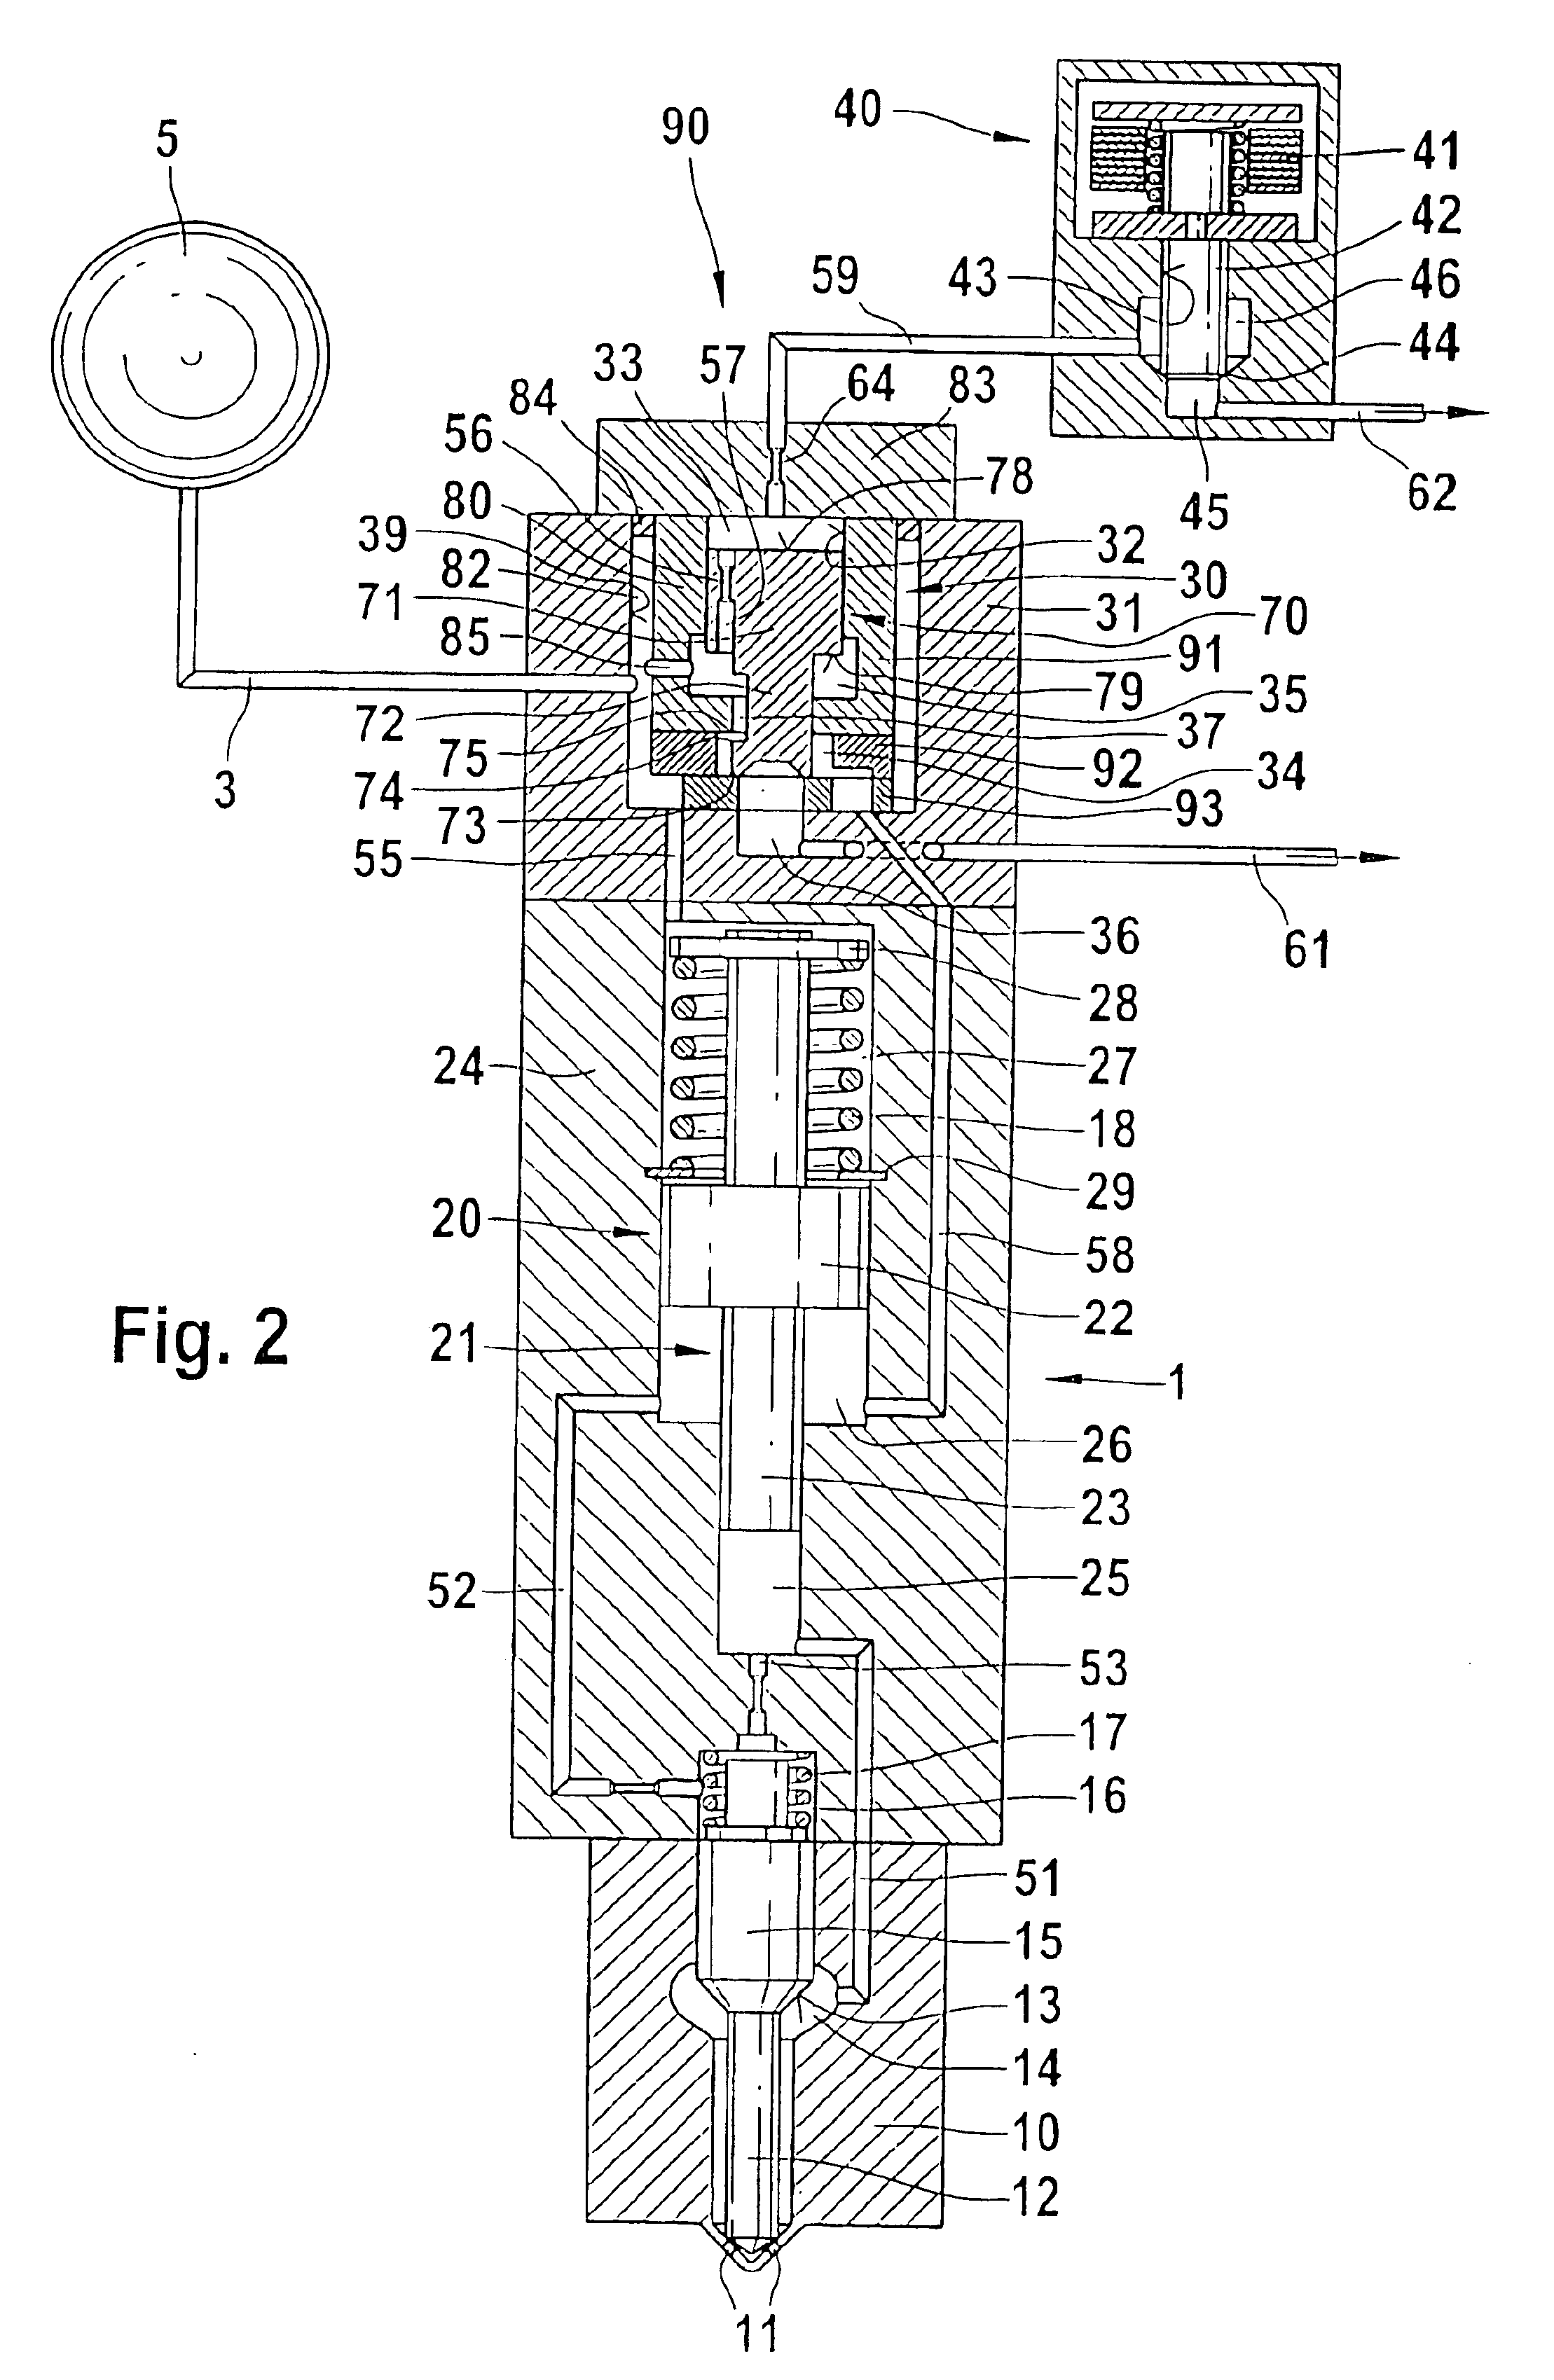 Fuel injection system for internal combustion engines